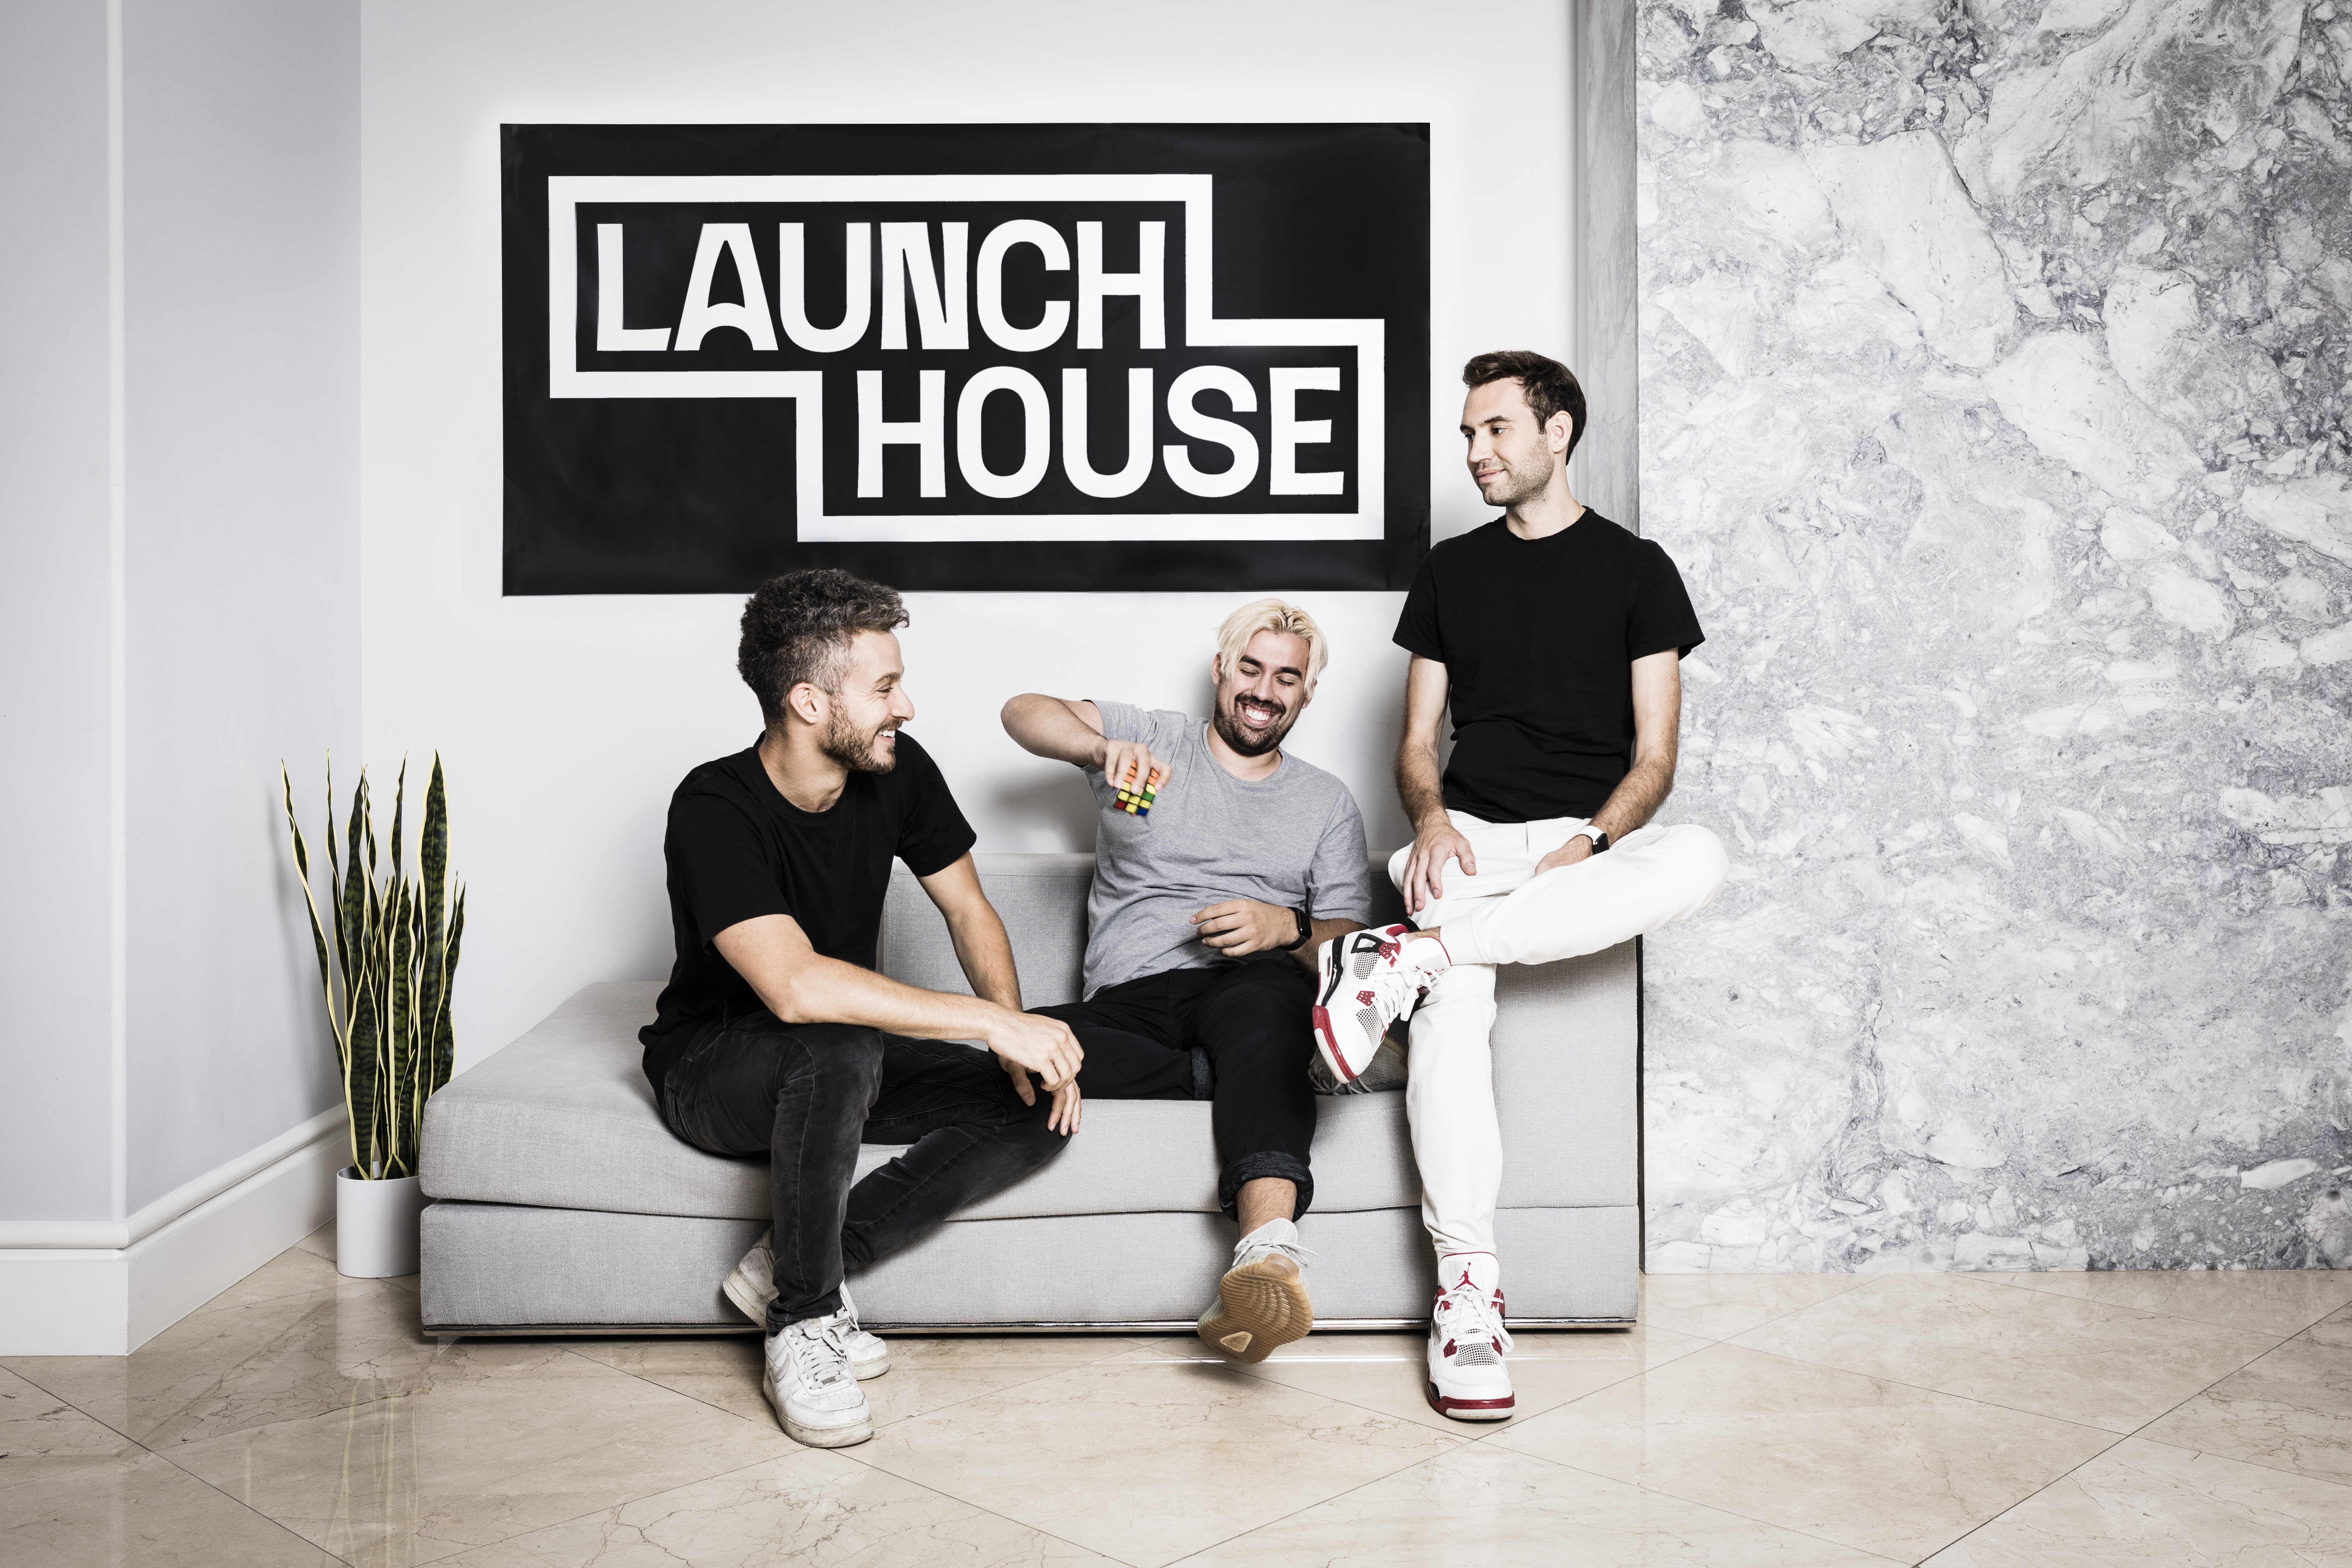 Startup Incubator Launch House Debuts $10M Fund with Web3 in Focus